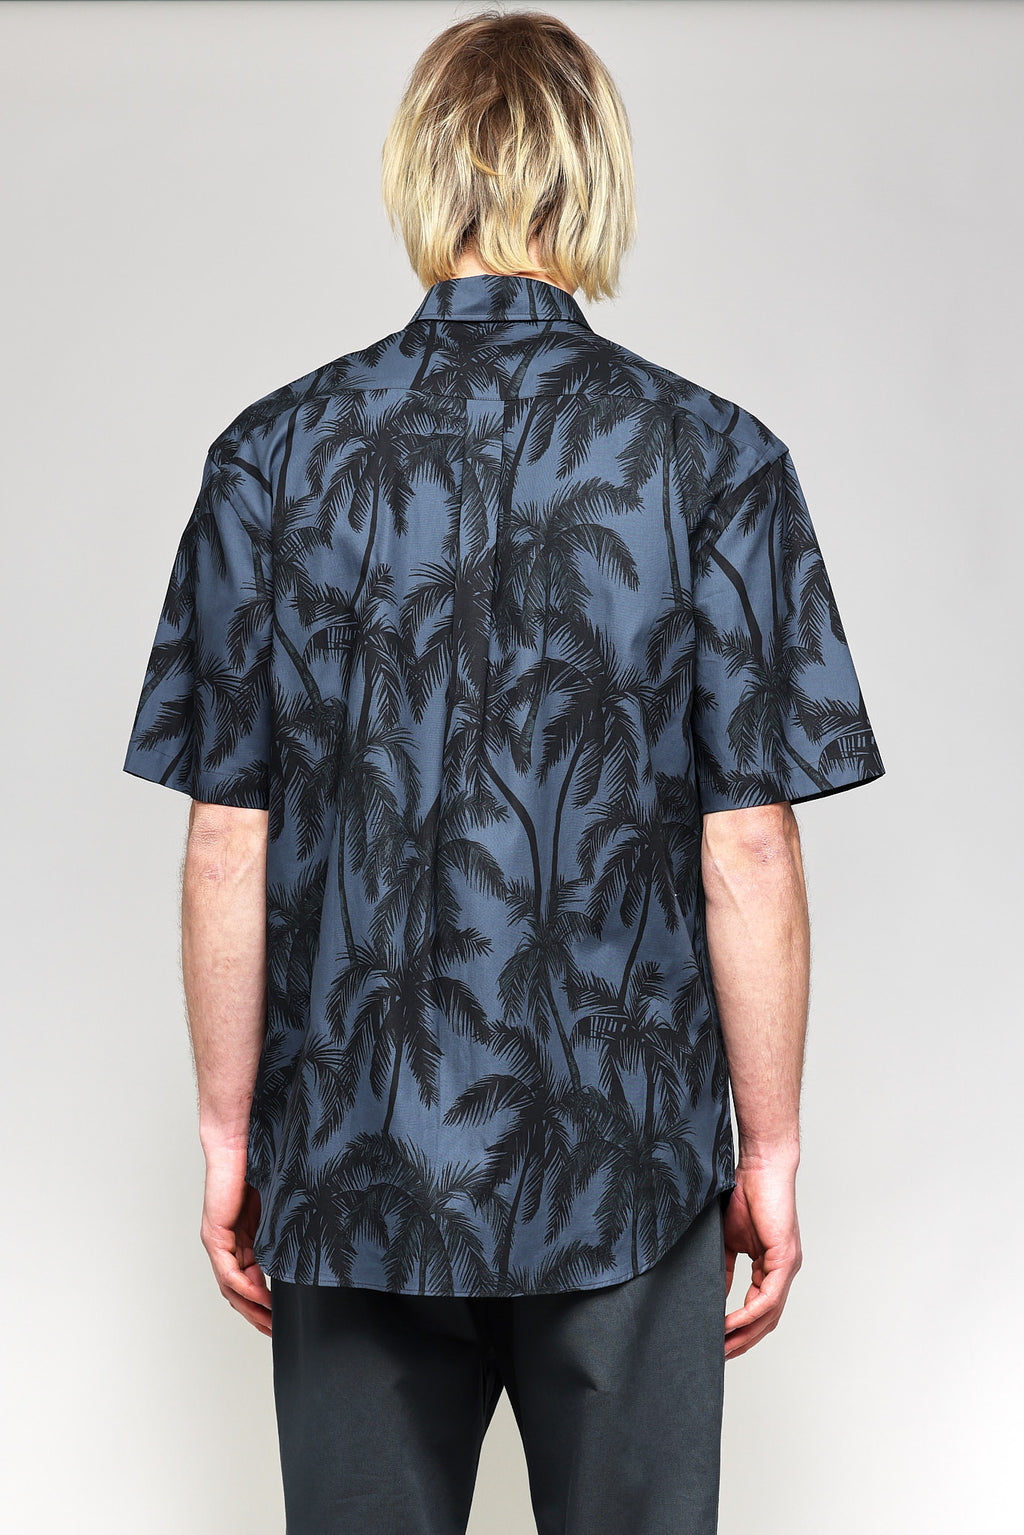 Japanese Palm Trees Print in Navy 03